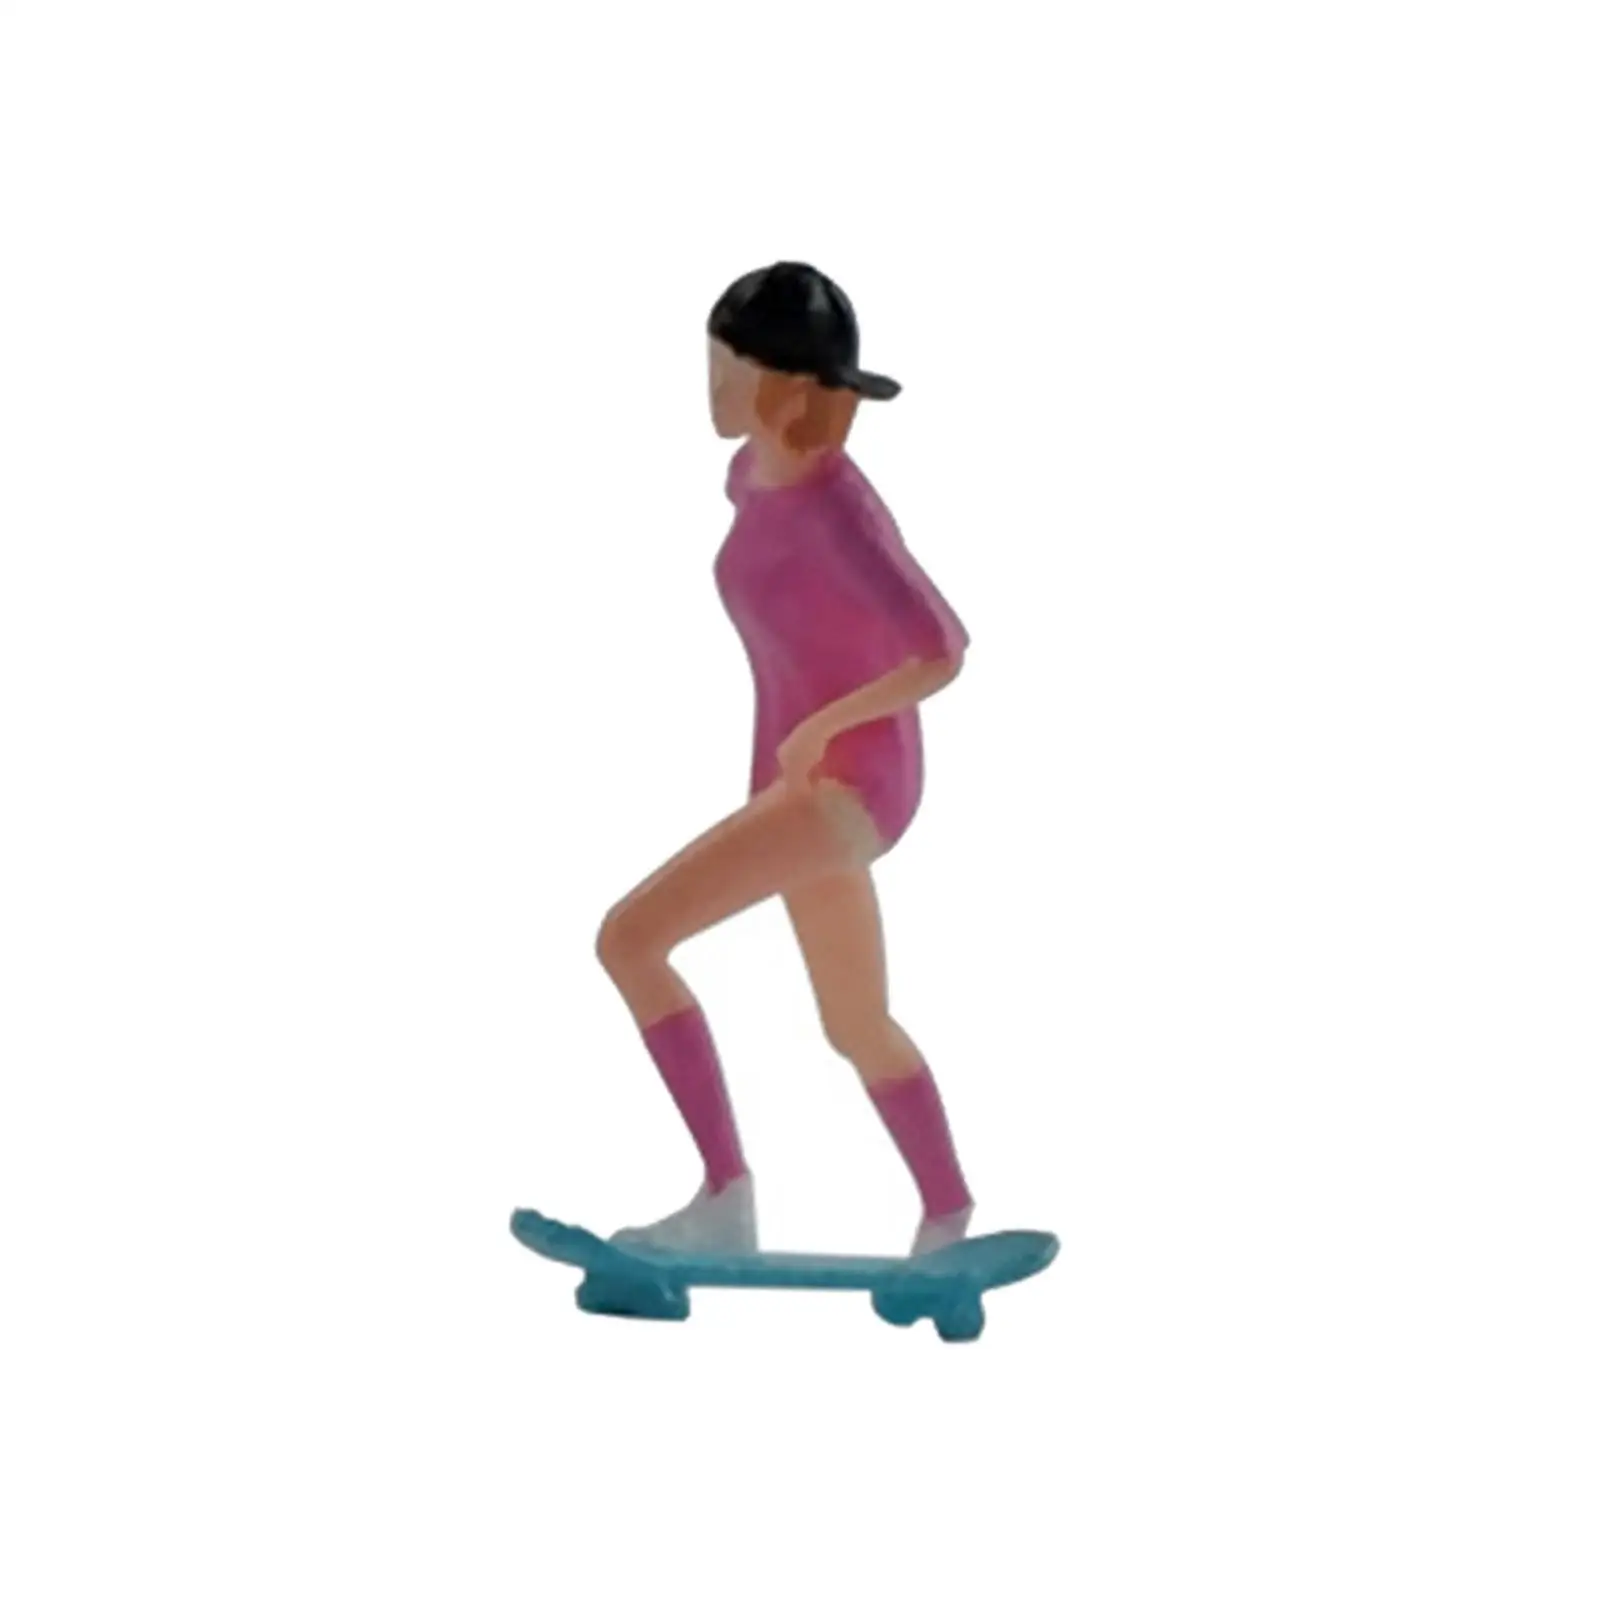 1/64 Scale People Figurines Skateboard Girl Mini People Model for Layout Decoration